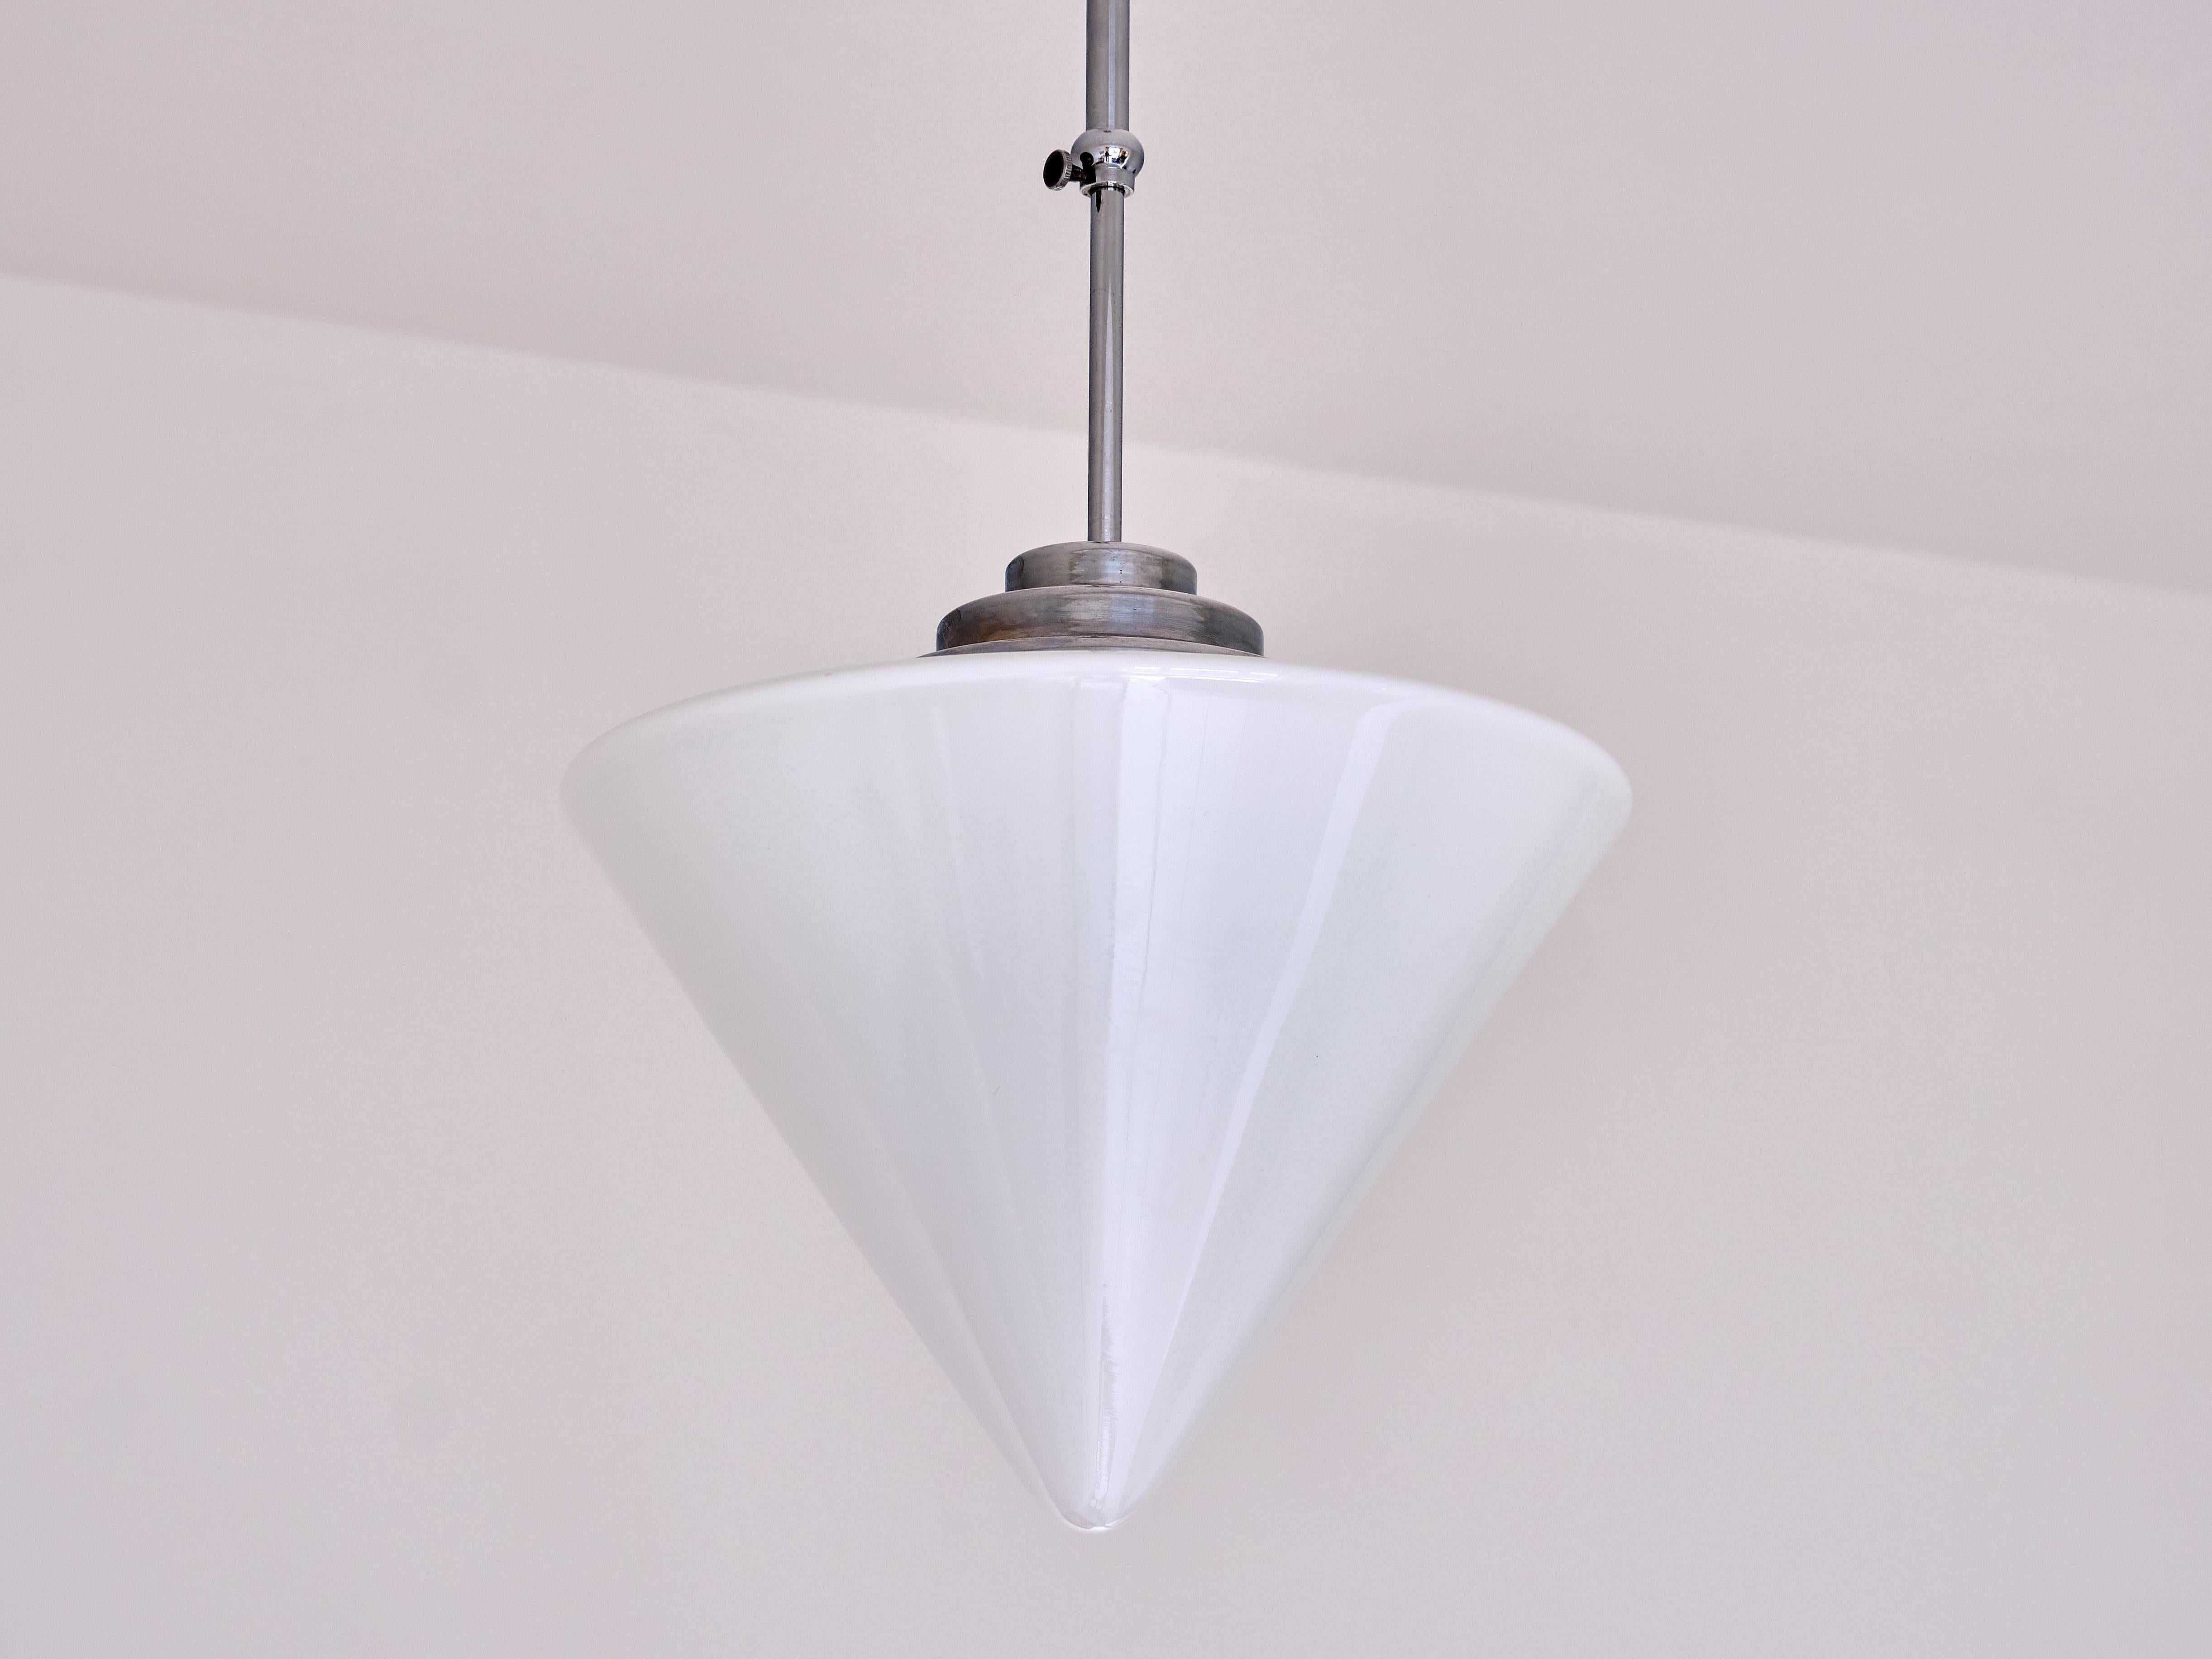 Mid-20th Century Gispen Cone Shaped Pendant Light with Adjustable Drop Height, Netherlands, 1950s For Sale